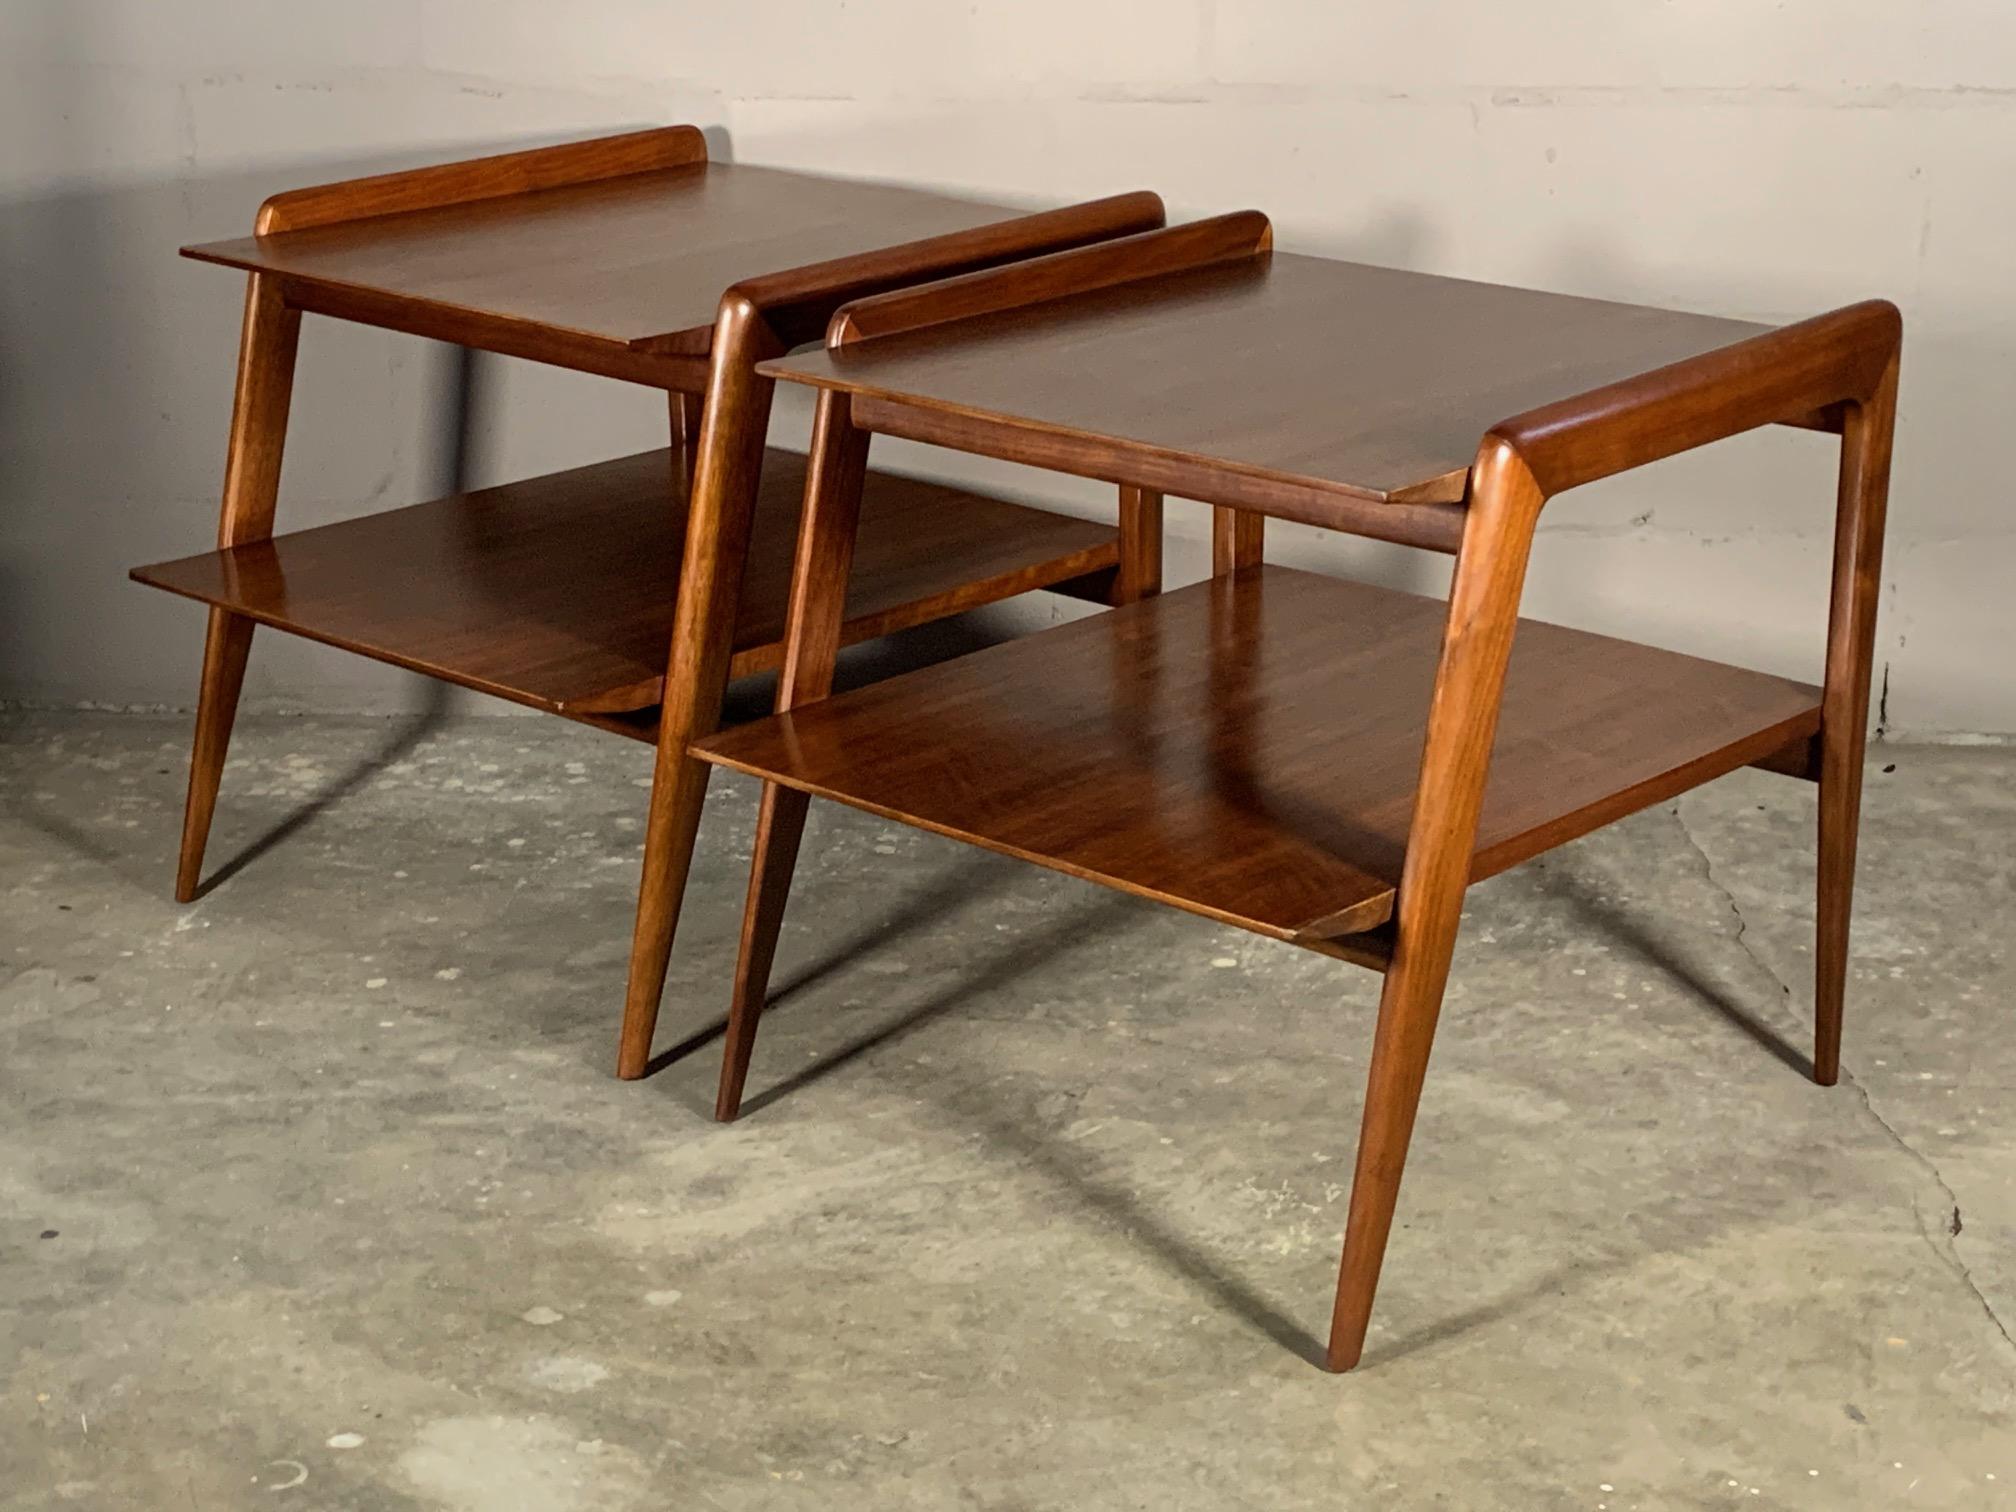 A pair of rare and beautiful occasional tables by Gio Ponti for Singer & Sons circa 1950s, model #2166. Two tiered with angular features so typical of his work. Newly restored with hand rubbed finish.